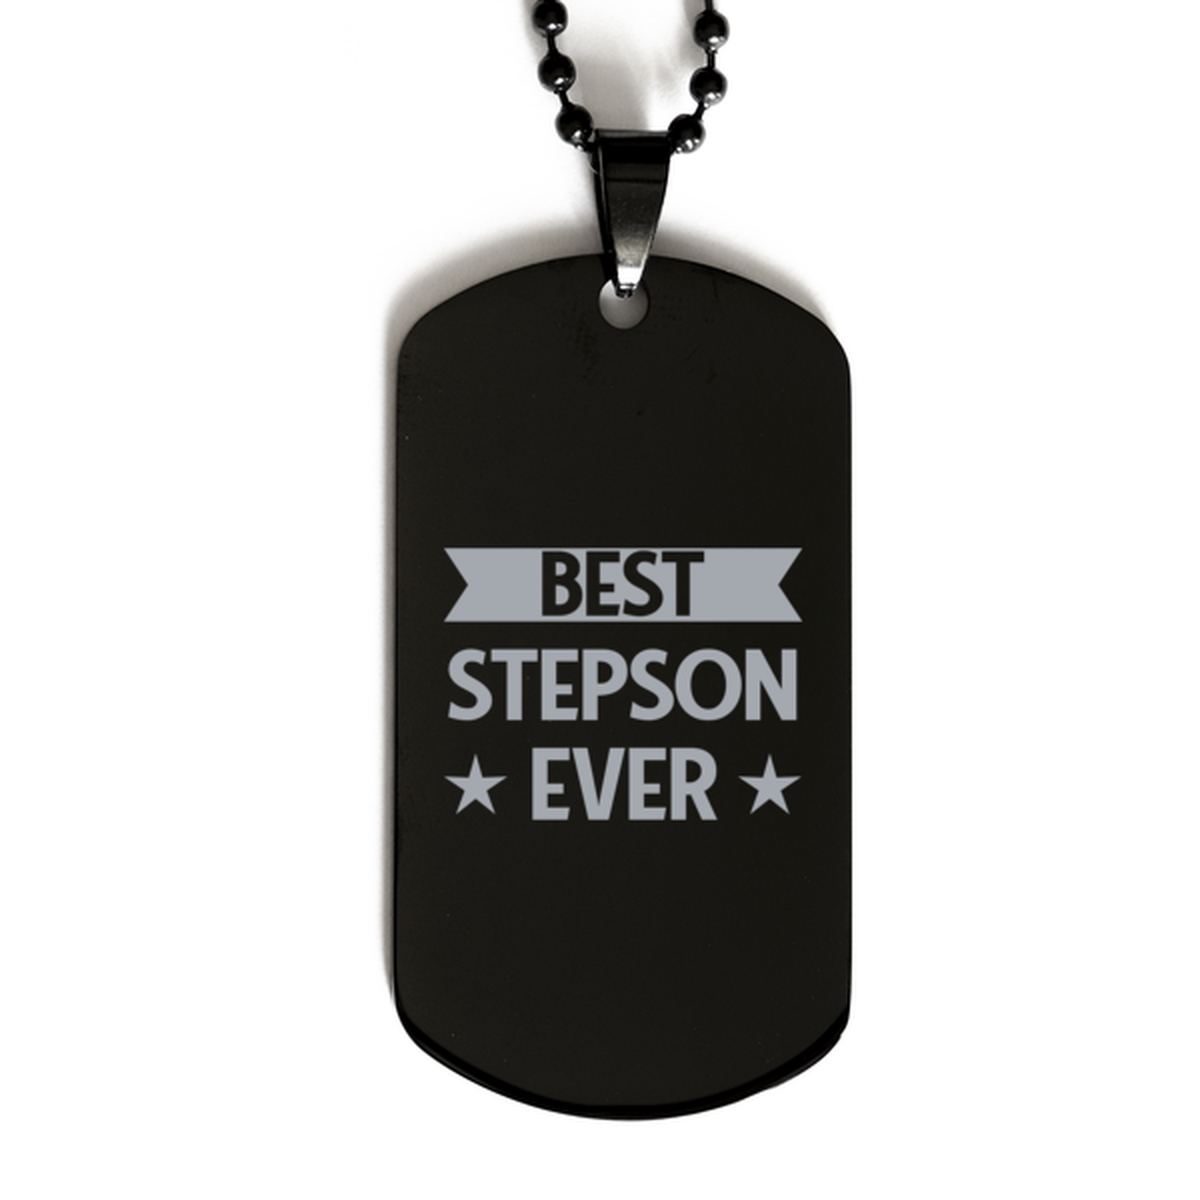 Best Stepson Ever Stepson Gifts, Funny Black Dog Tag For Stepson, Birthday Family Presents Engraved Necklace For Men